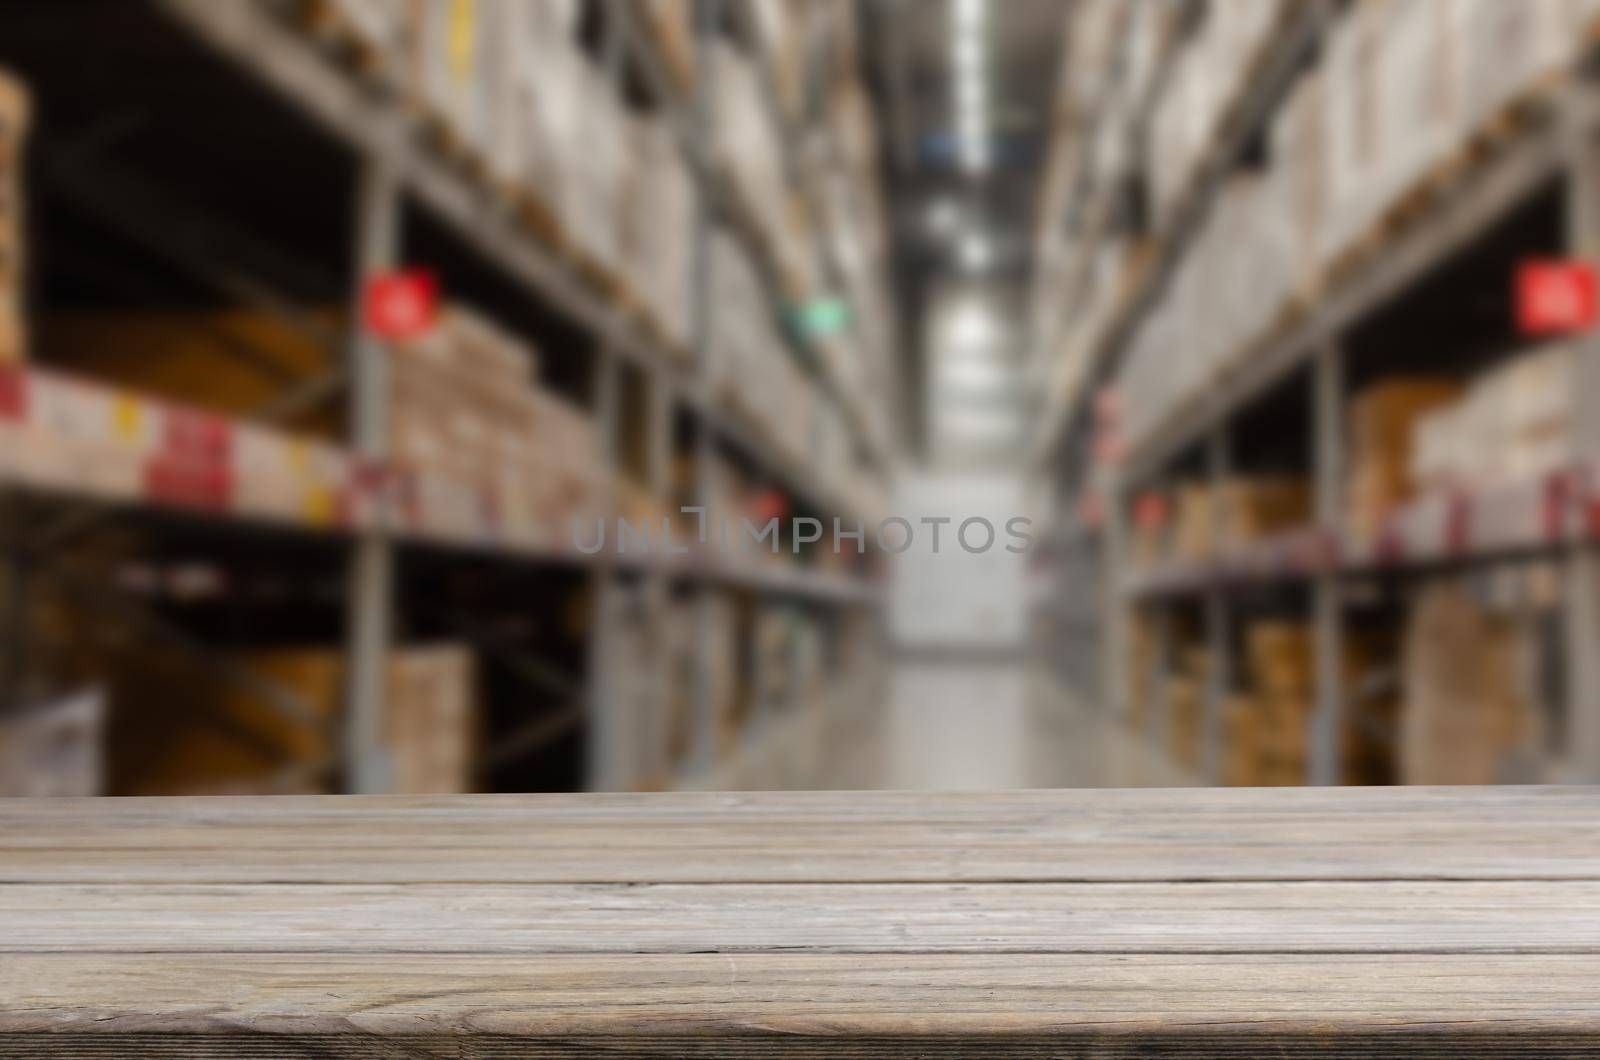 wood table top shelf product counter blank good blur warehouse factory interior cargo business display storehouse. by aoo3771